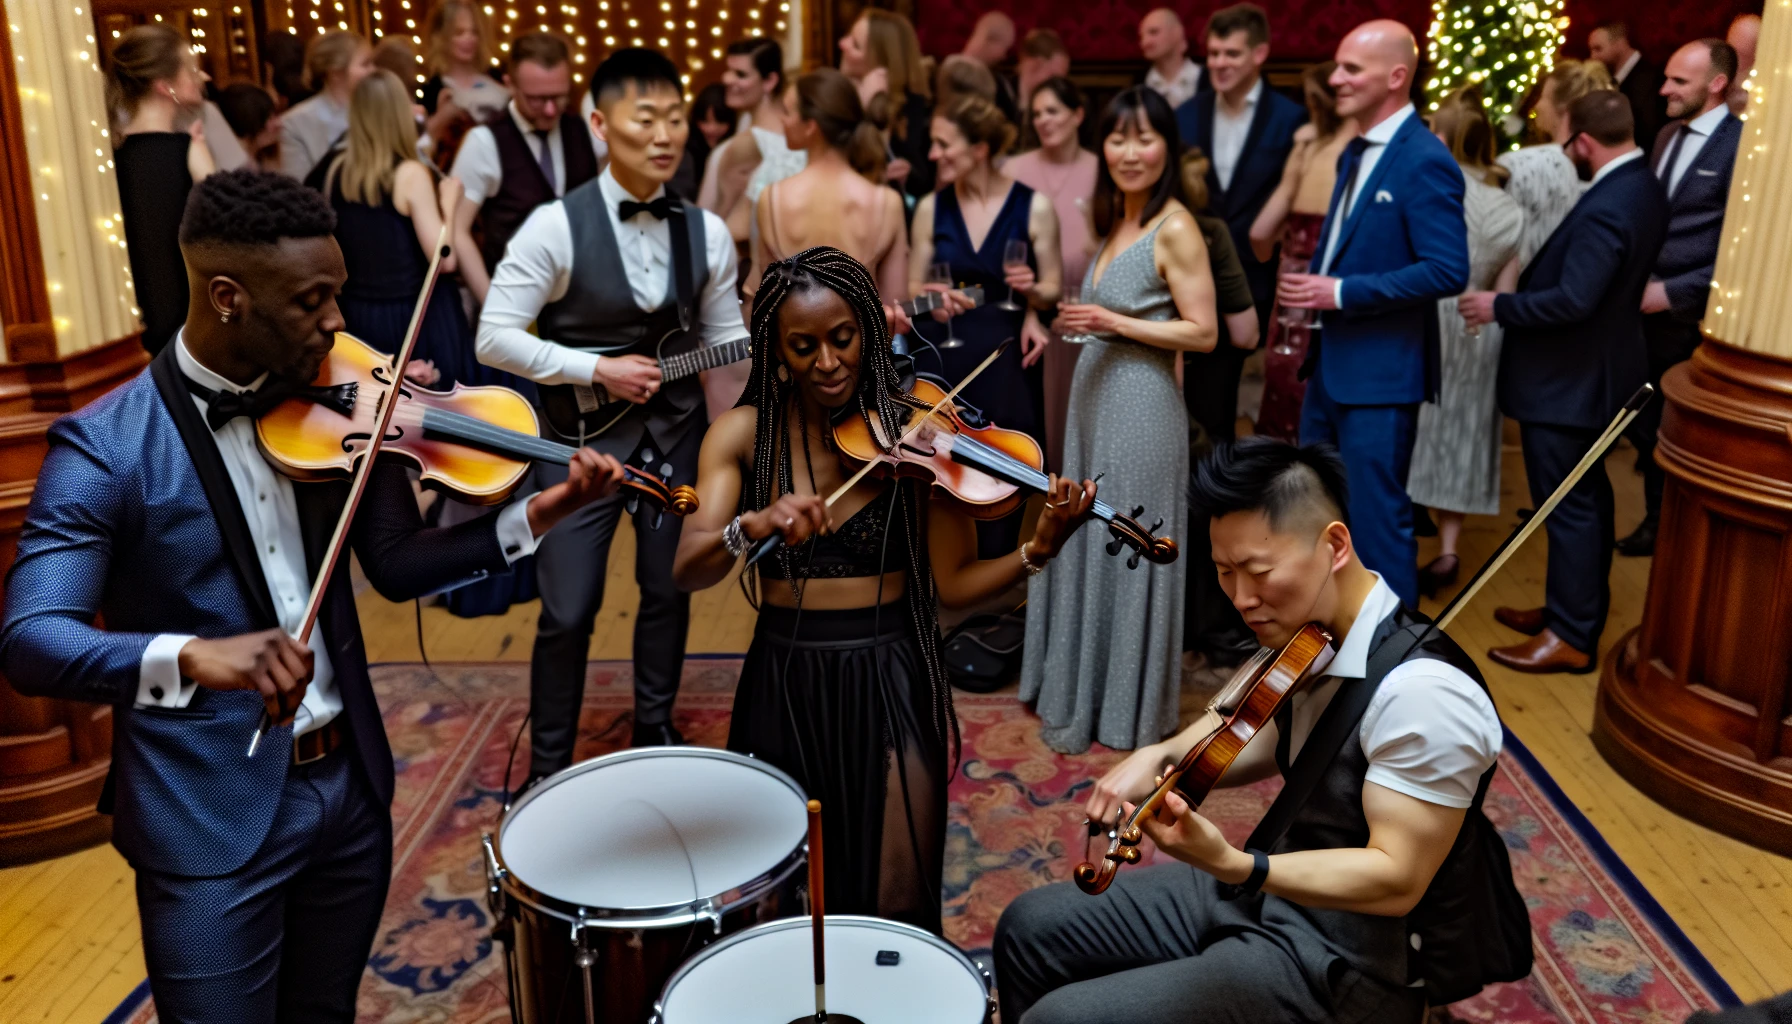 A diverse group of professional musicians performing at a wedding in Manchester.